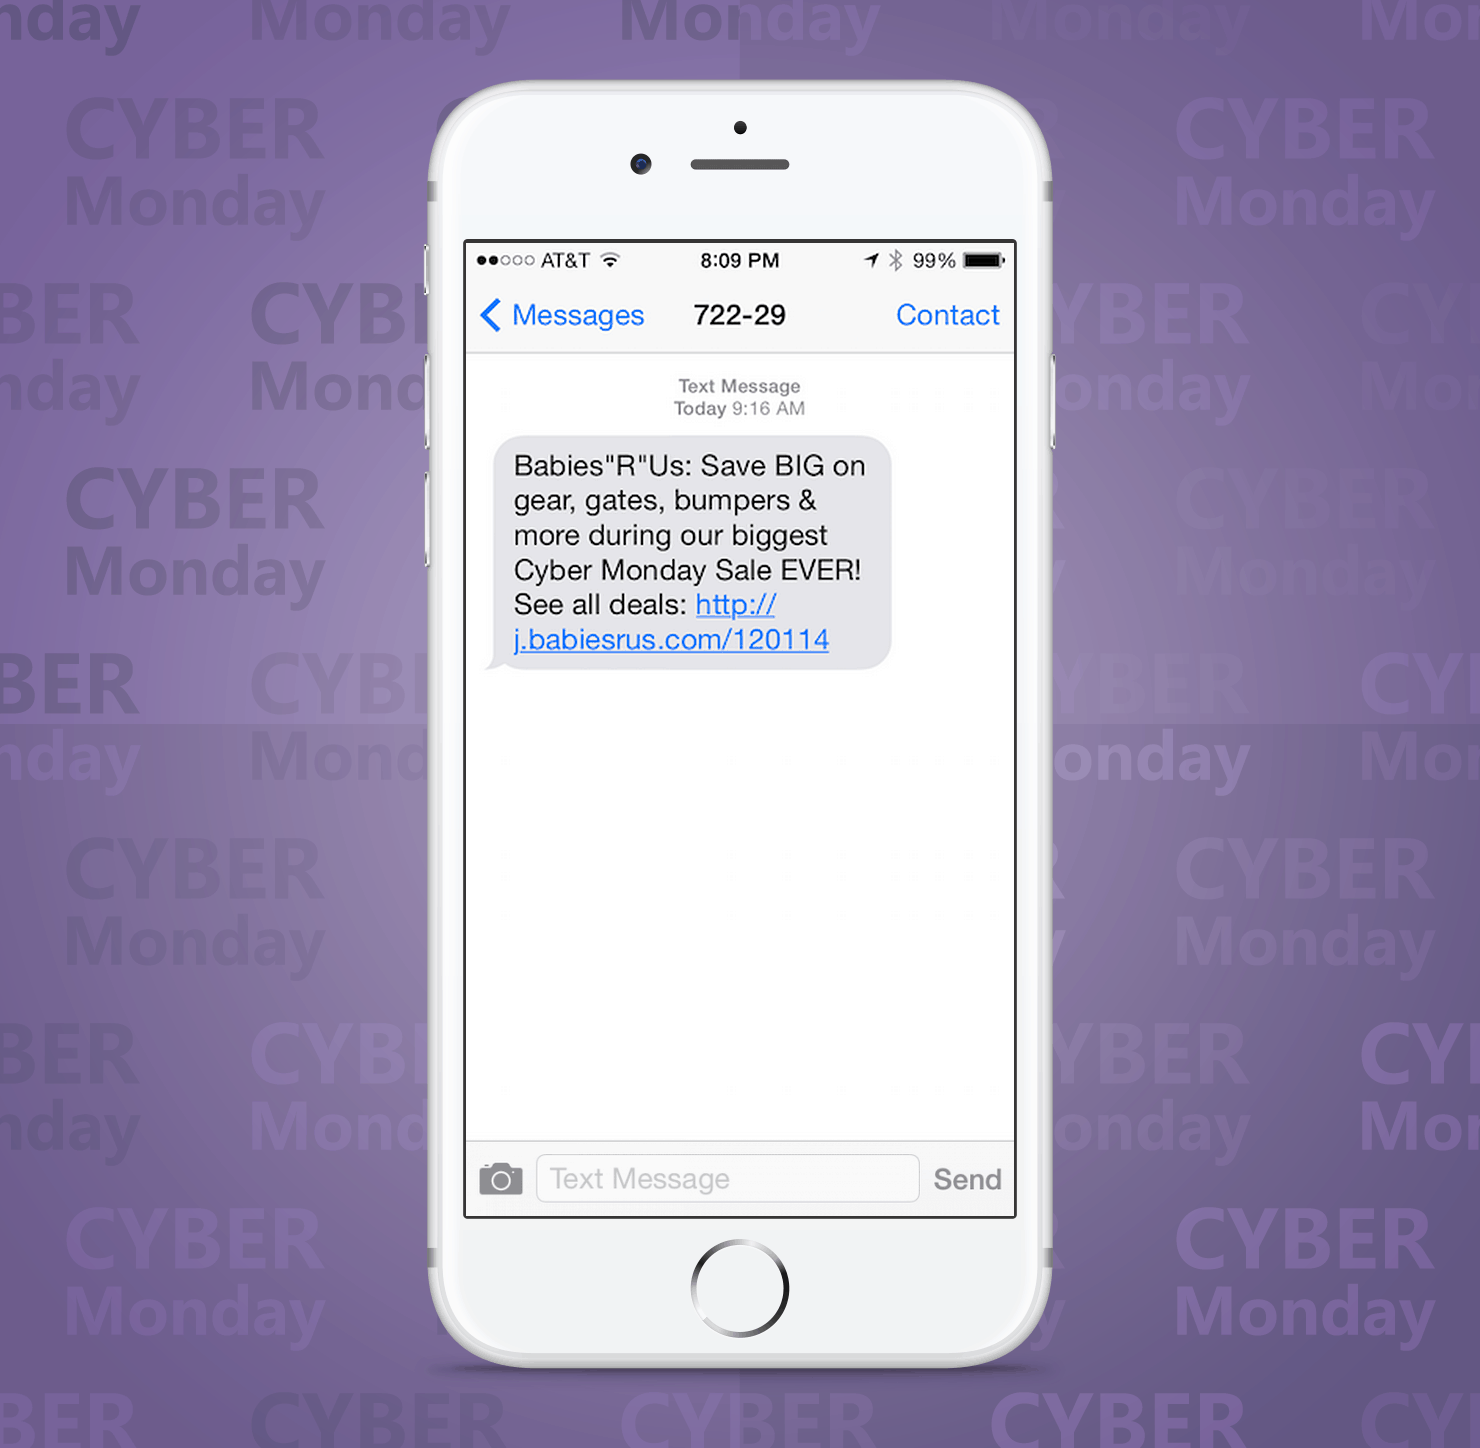 SMS Coupon Example Sent on Cyber Monday From Babies-R-Us Retail Stores to Customers